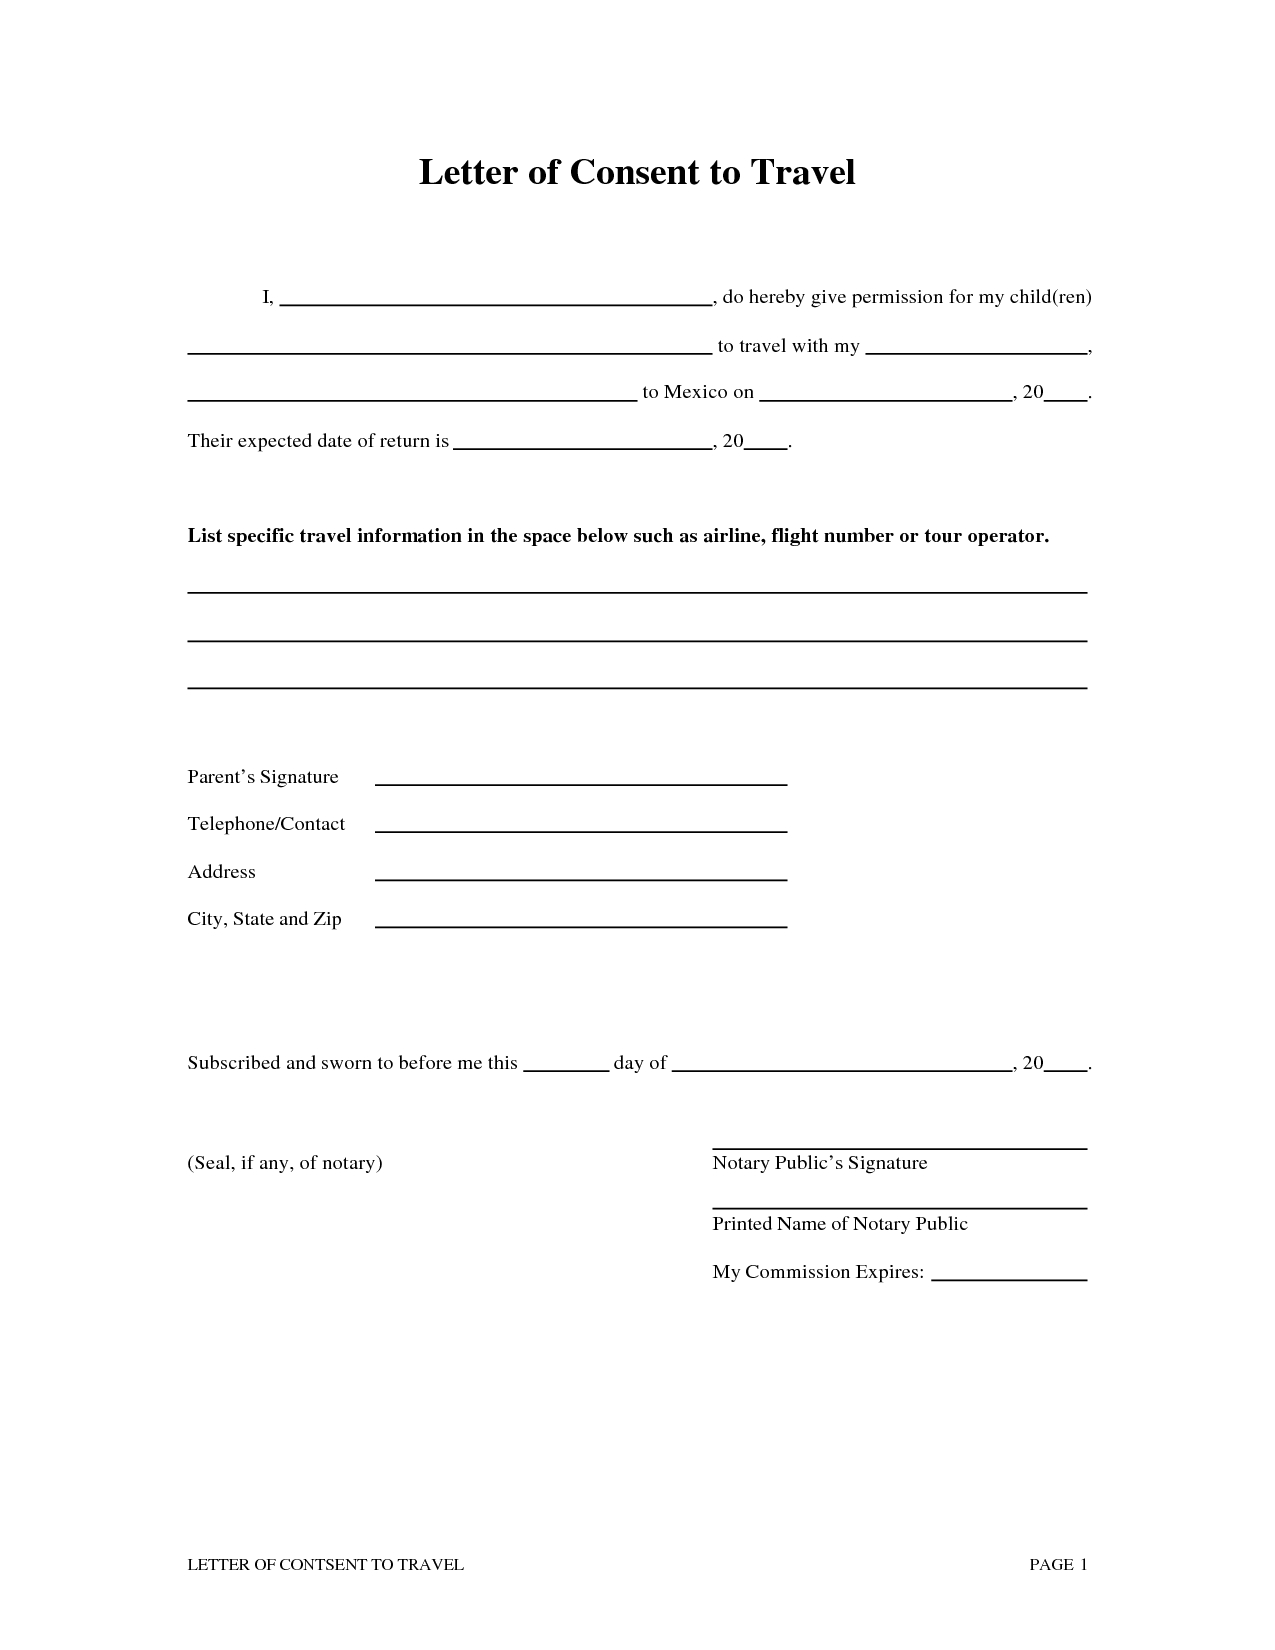 minor-travel-consent-form-notarized-2022-printable-consent-form-2022